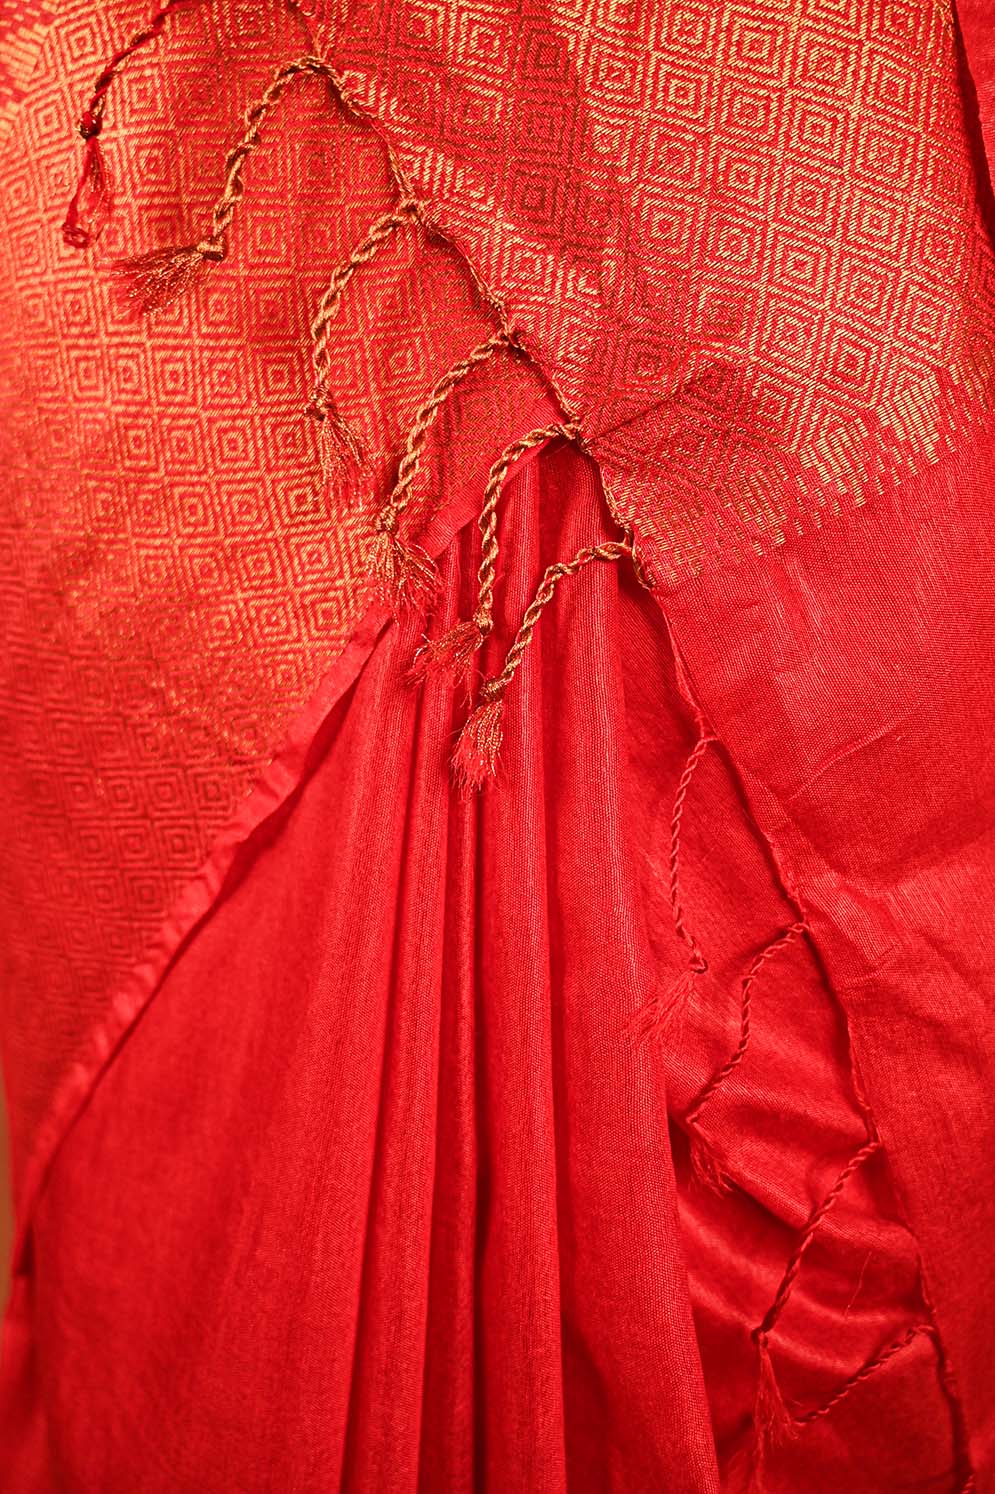 Ready To Wear Red south cotton silk With Zari Temple Border And Ornate Pallu Wrap in 1 minute saree - Isadora Life